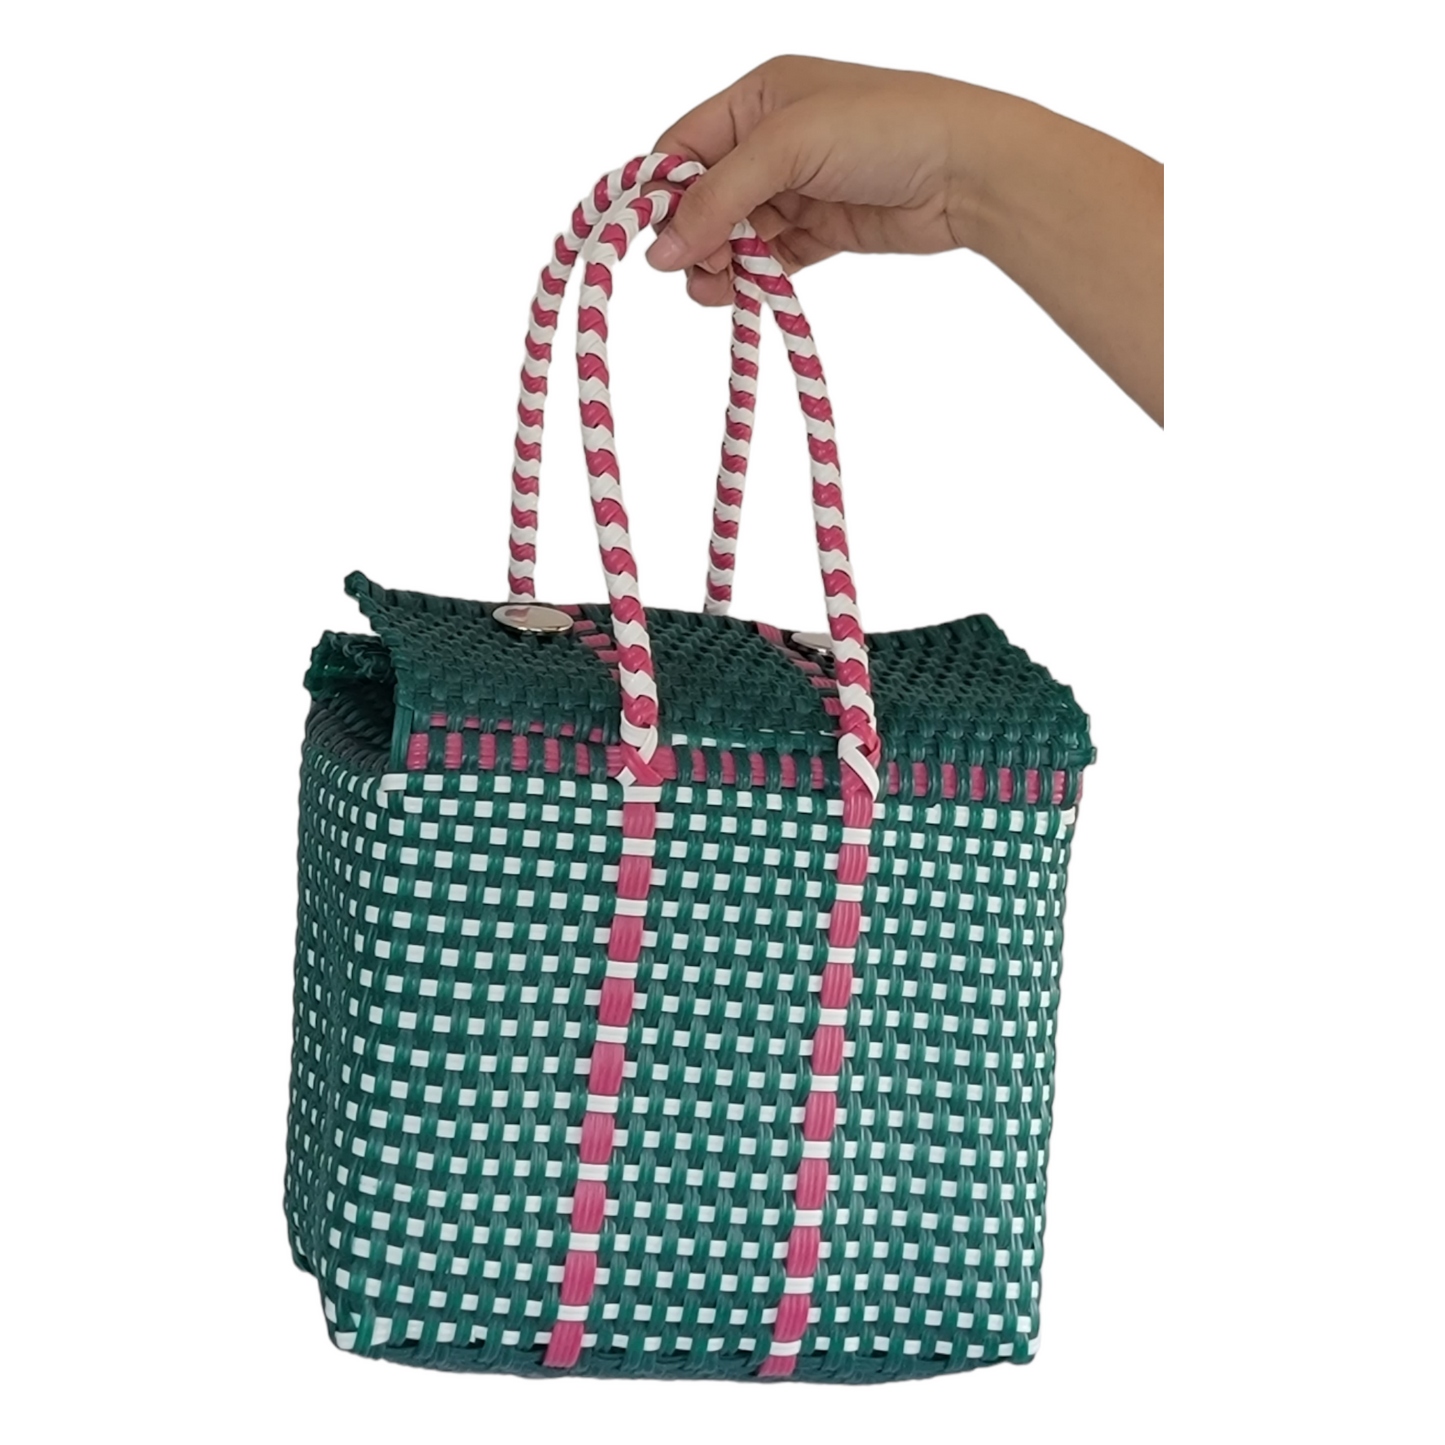 Watermelom Green & Pink Medium Basket | Lunch Basket | Handwoven Recycled Bags